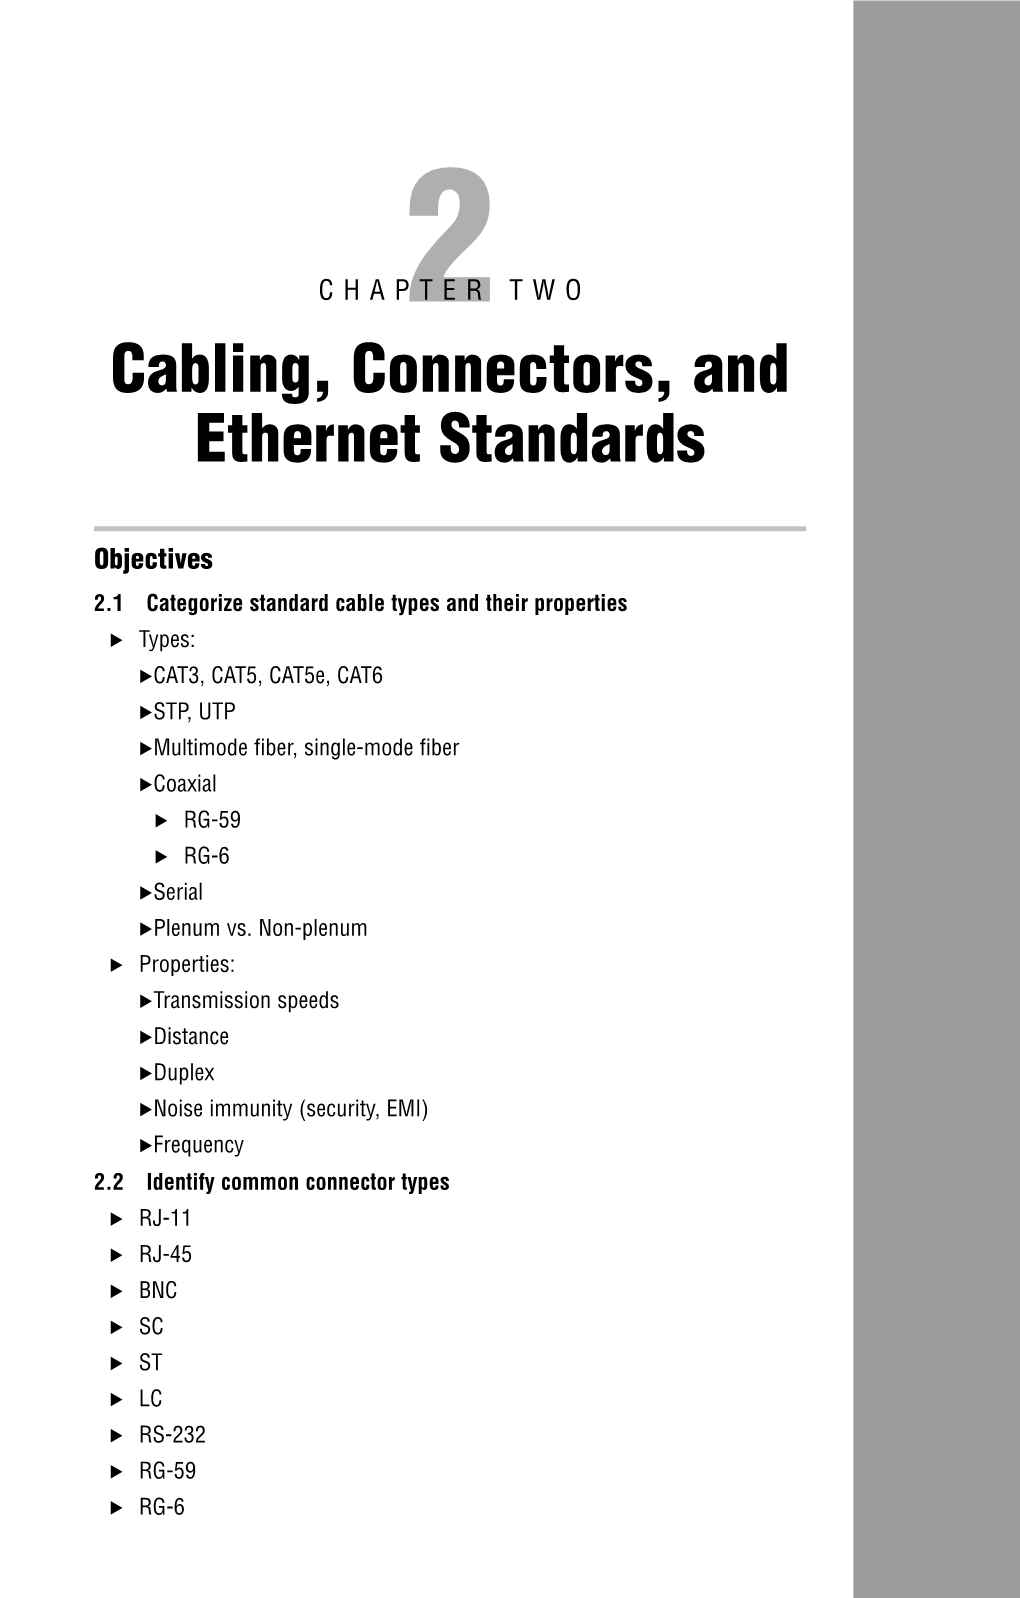 Cabling, Connectors, and Ethernet Standards